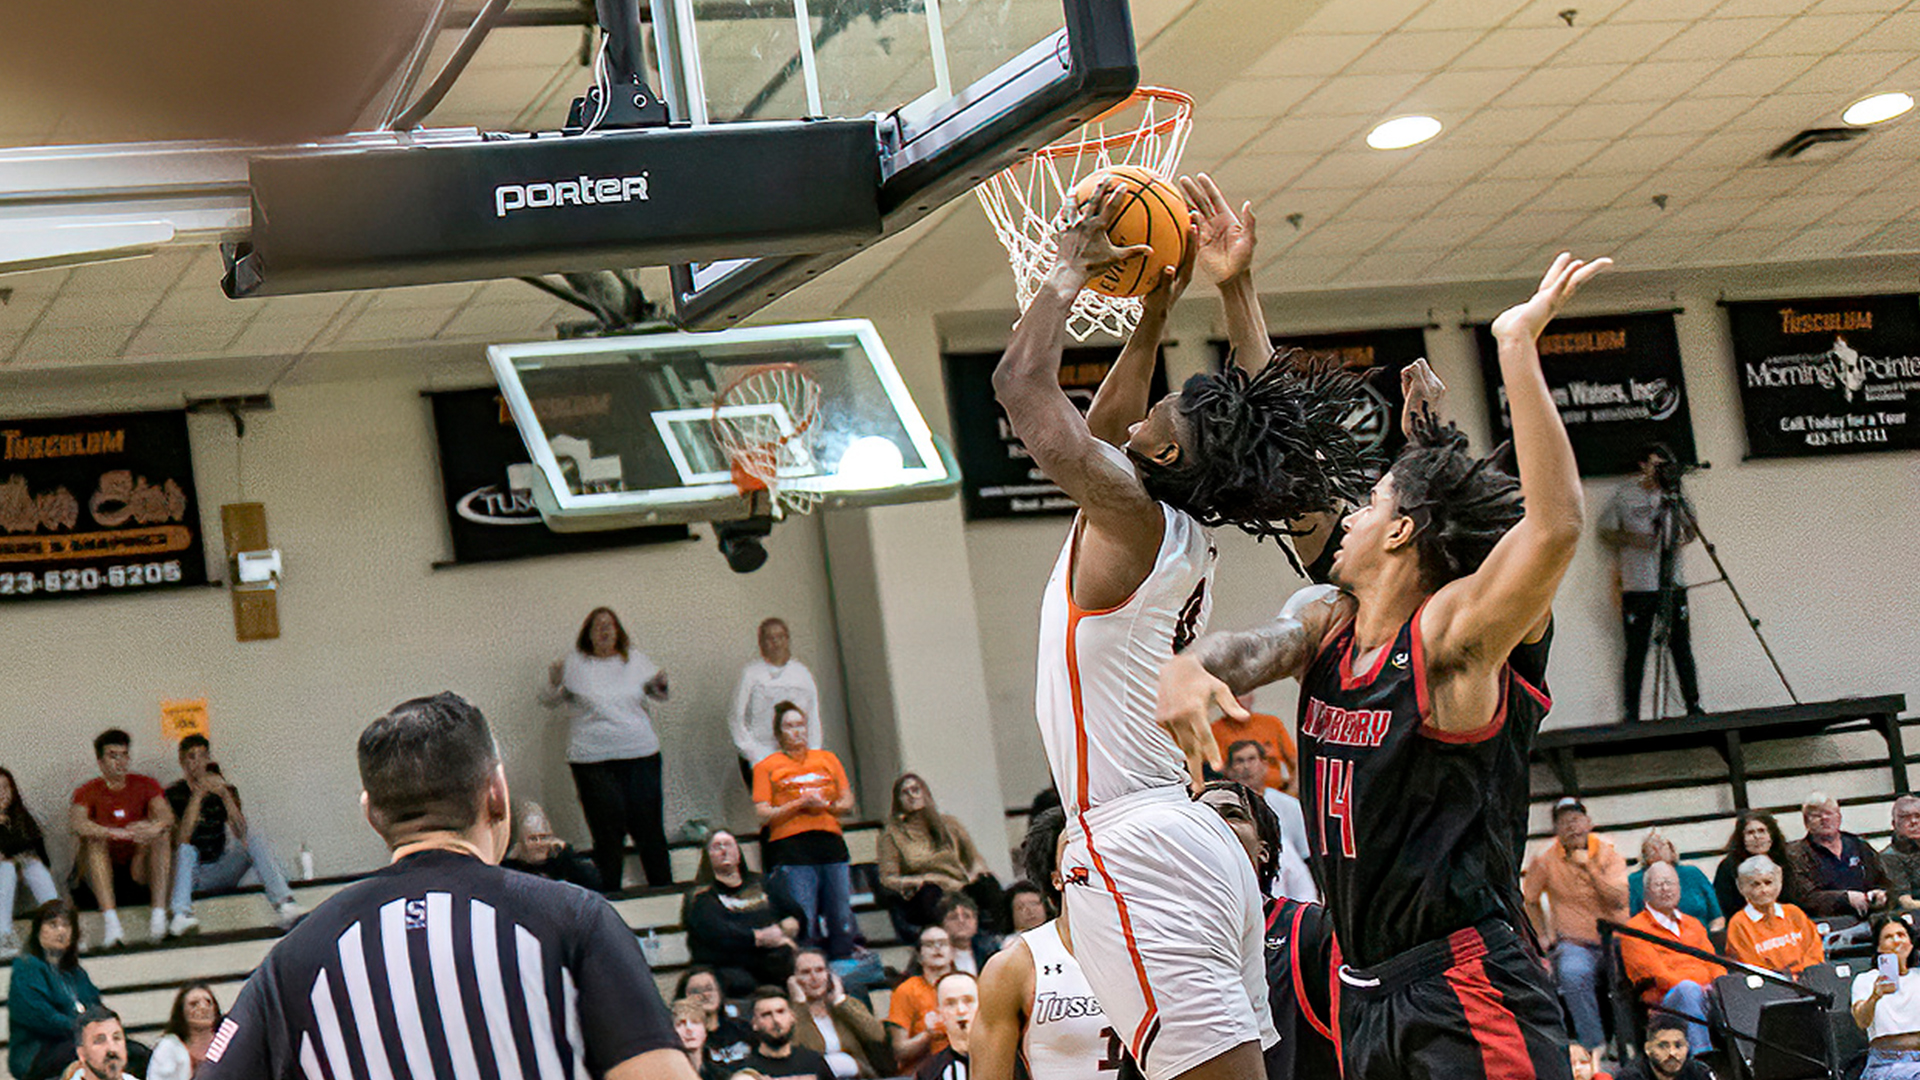 Joshua Scott's potential game-winner is blocked at the buzzer as Tusculum falls 60-59 to Newberry in SAC Quarterfinal (photo by Chuck Williams)